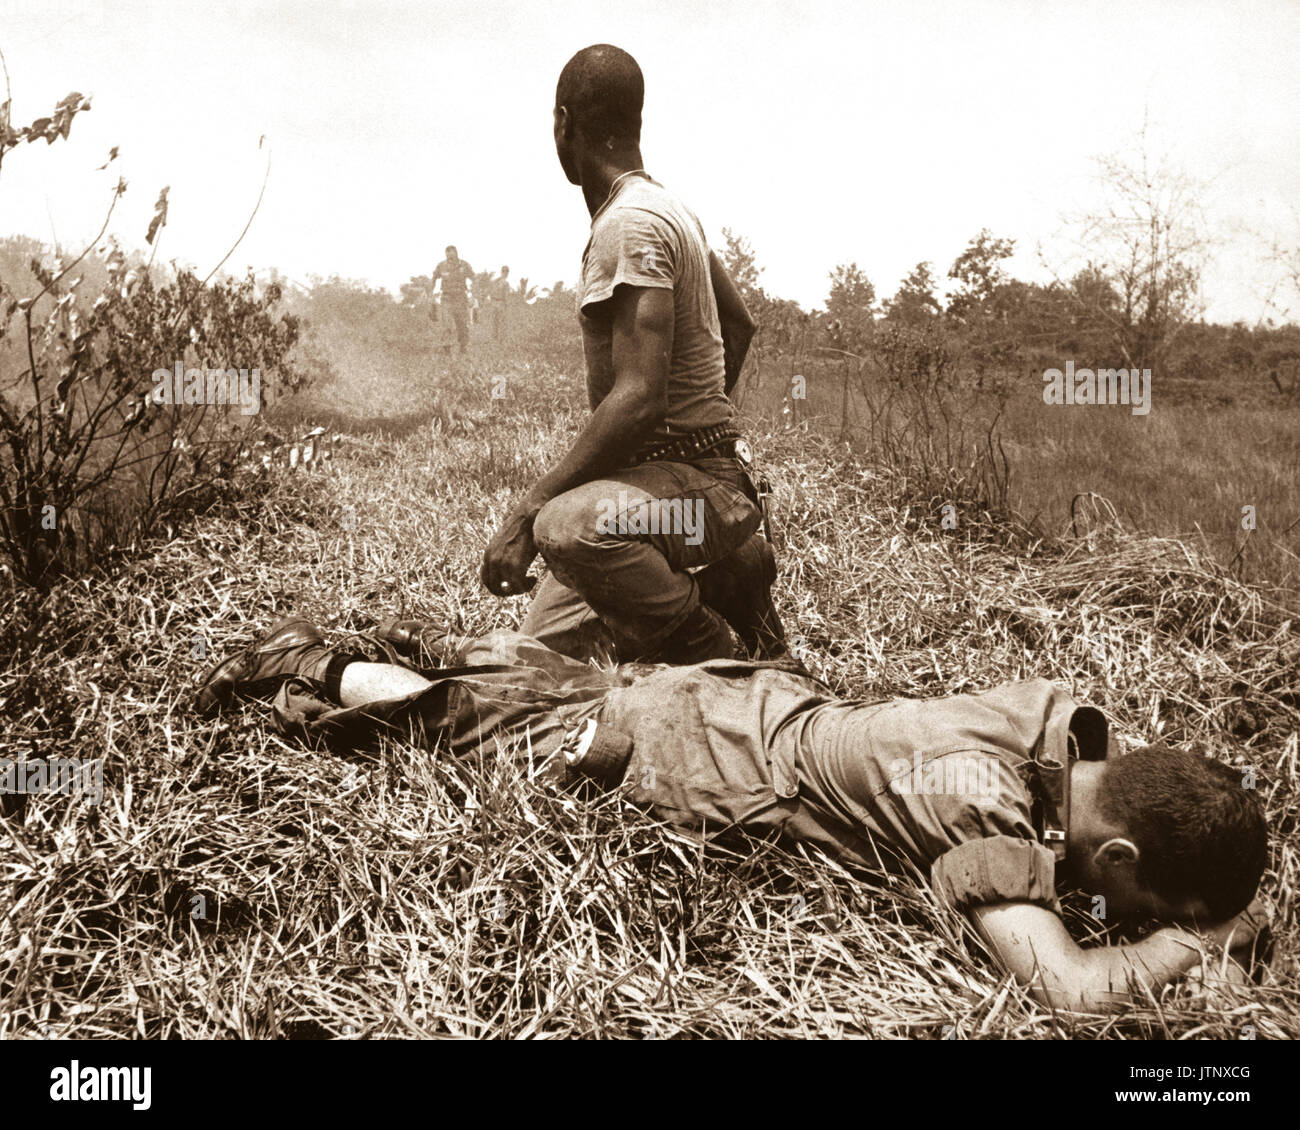 A young American lieutenant, his leg burned by an exploding Viet Cong white phosphorus booby trap, is treated by a medic.  1966.  JUSPAO.  (USIA) EXACT DATE SHOT UNKNOWN NARA FILE #:  306-MVP-16-1 WAR & CONFLICT BOOK #:  404 Stock Photo